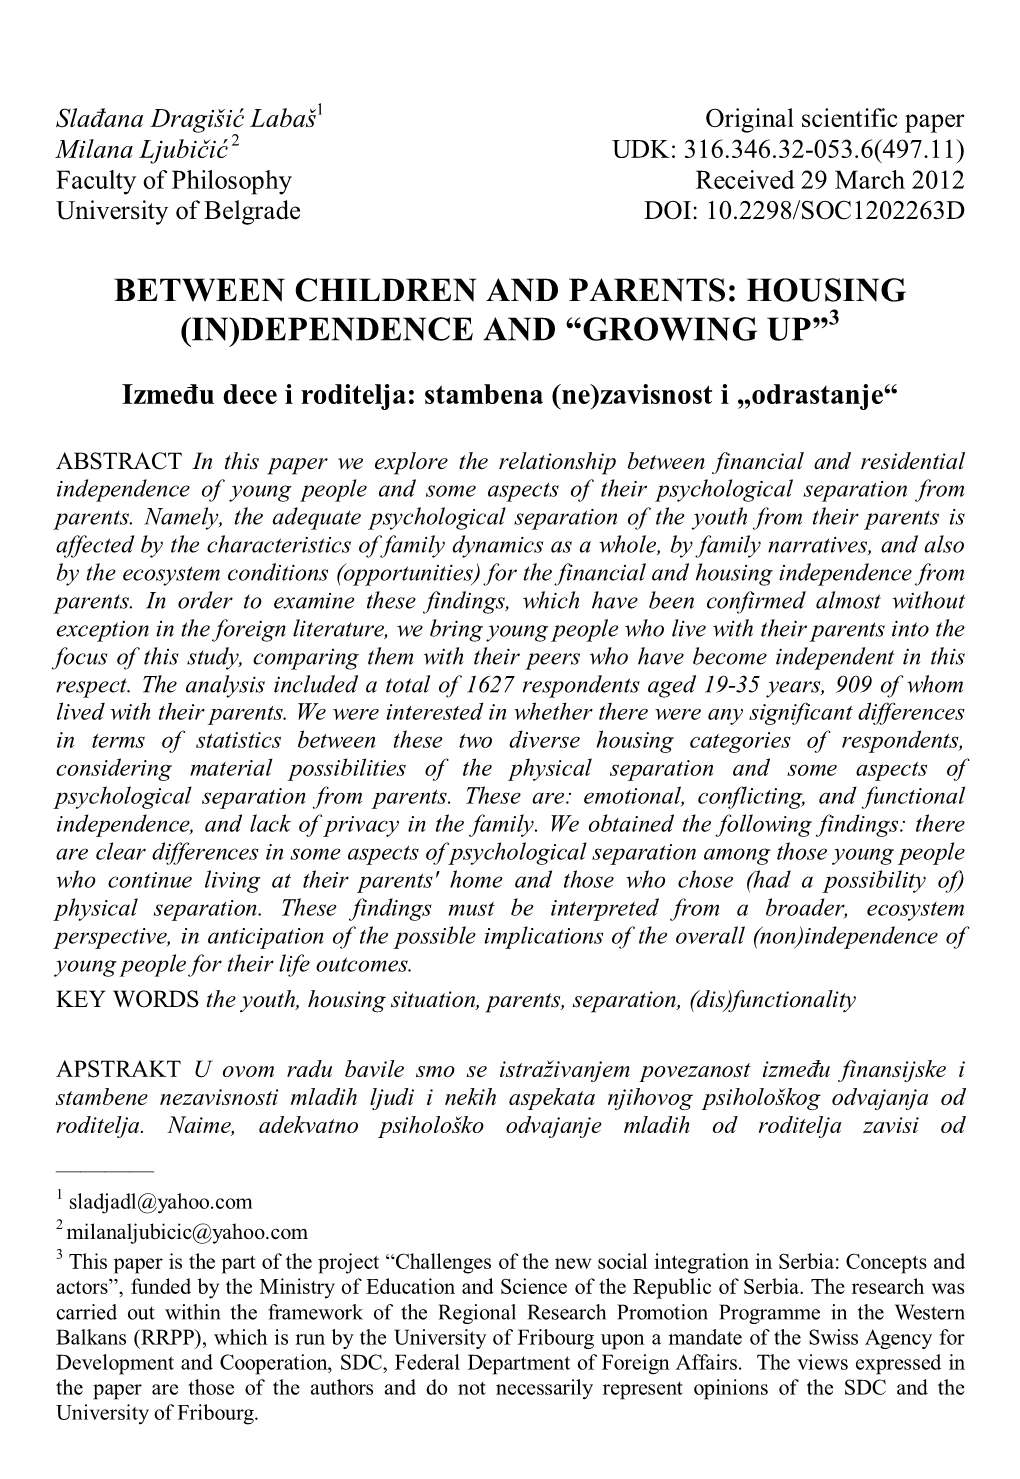 Between Children and Parents: Housing (In)Dependence and “Growing Up”3